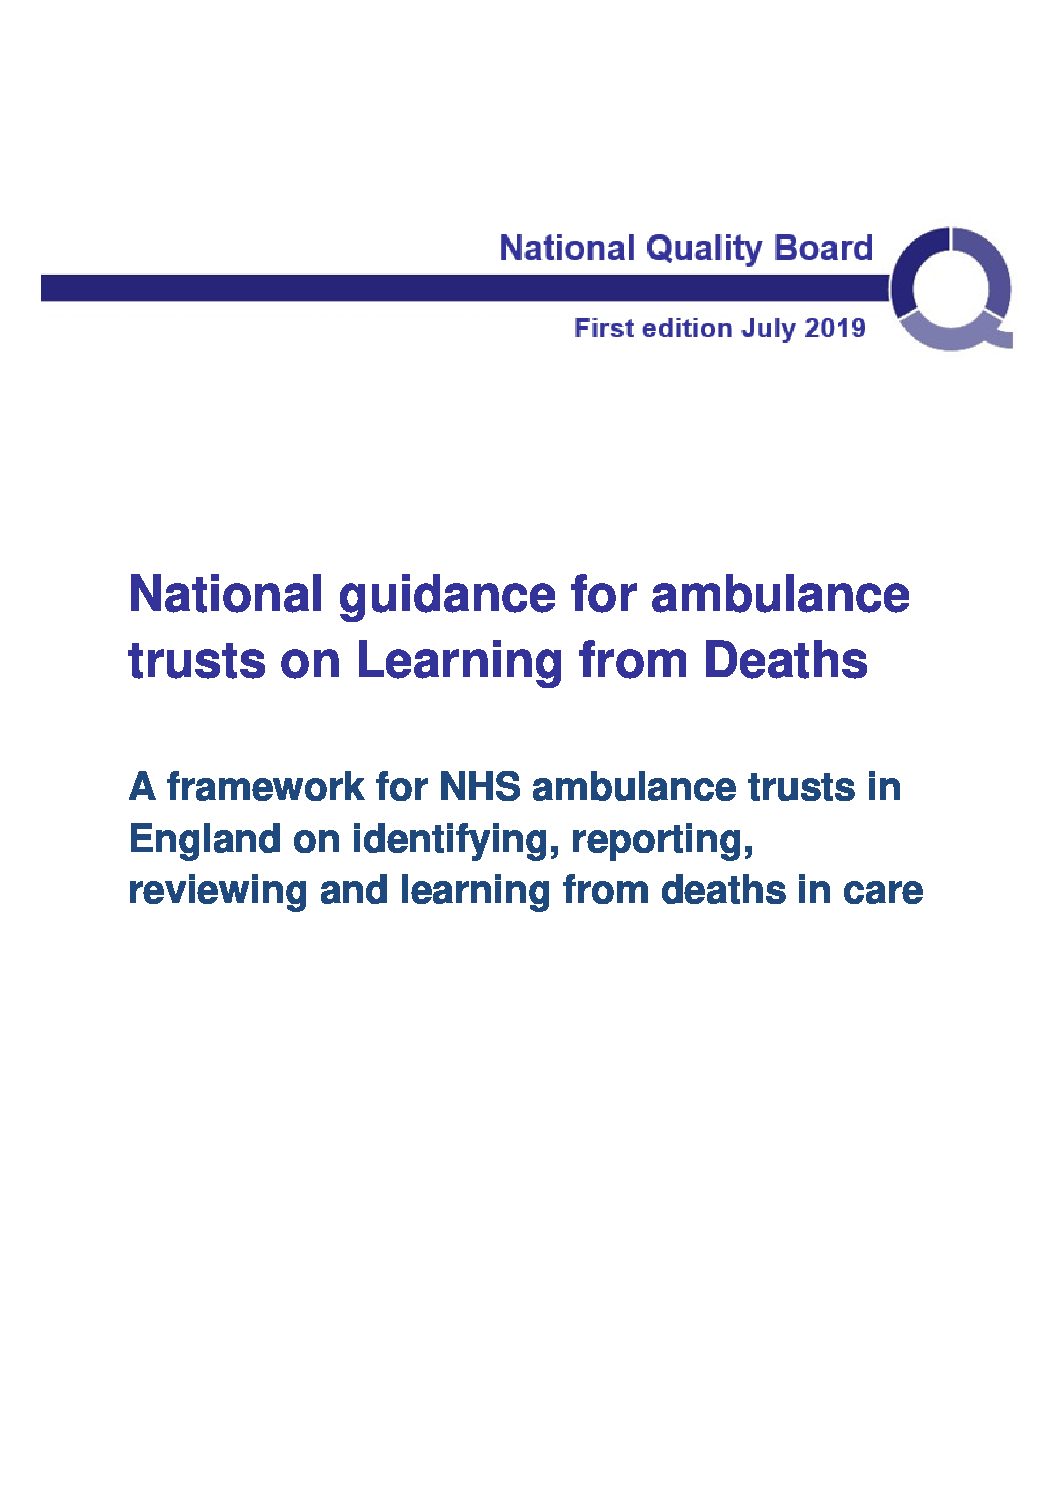 Learning from deaths guidance for ambulance trusts